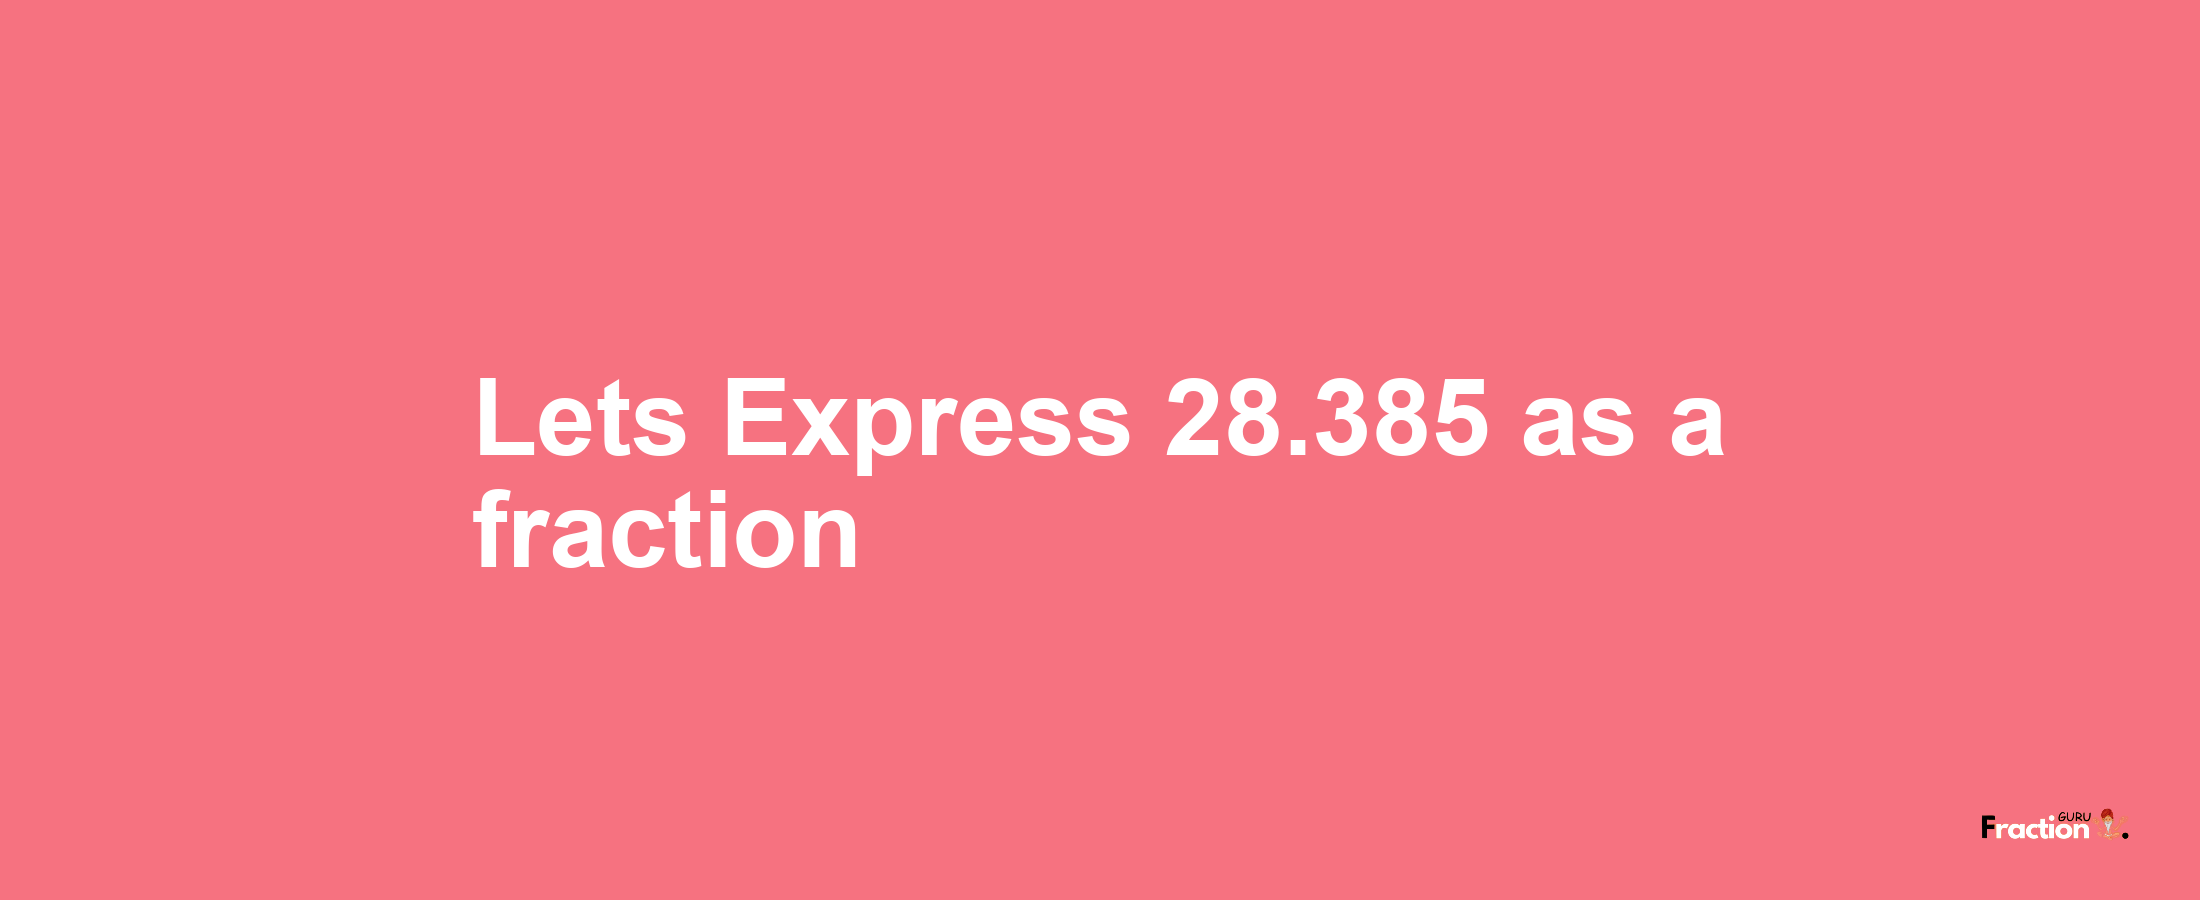 Lets Express 28.385 as afraction